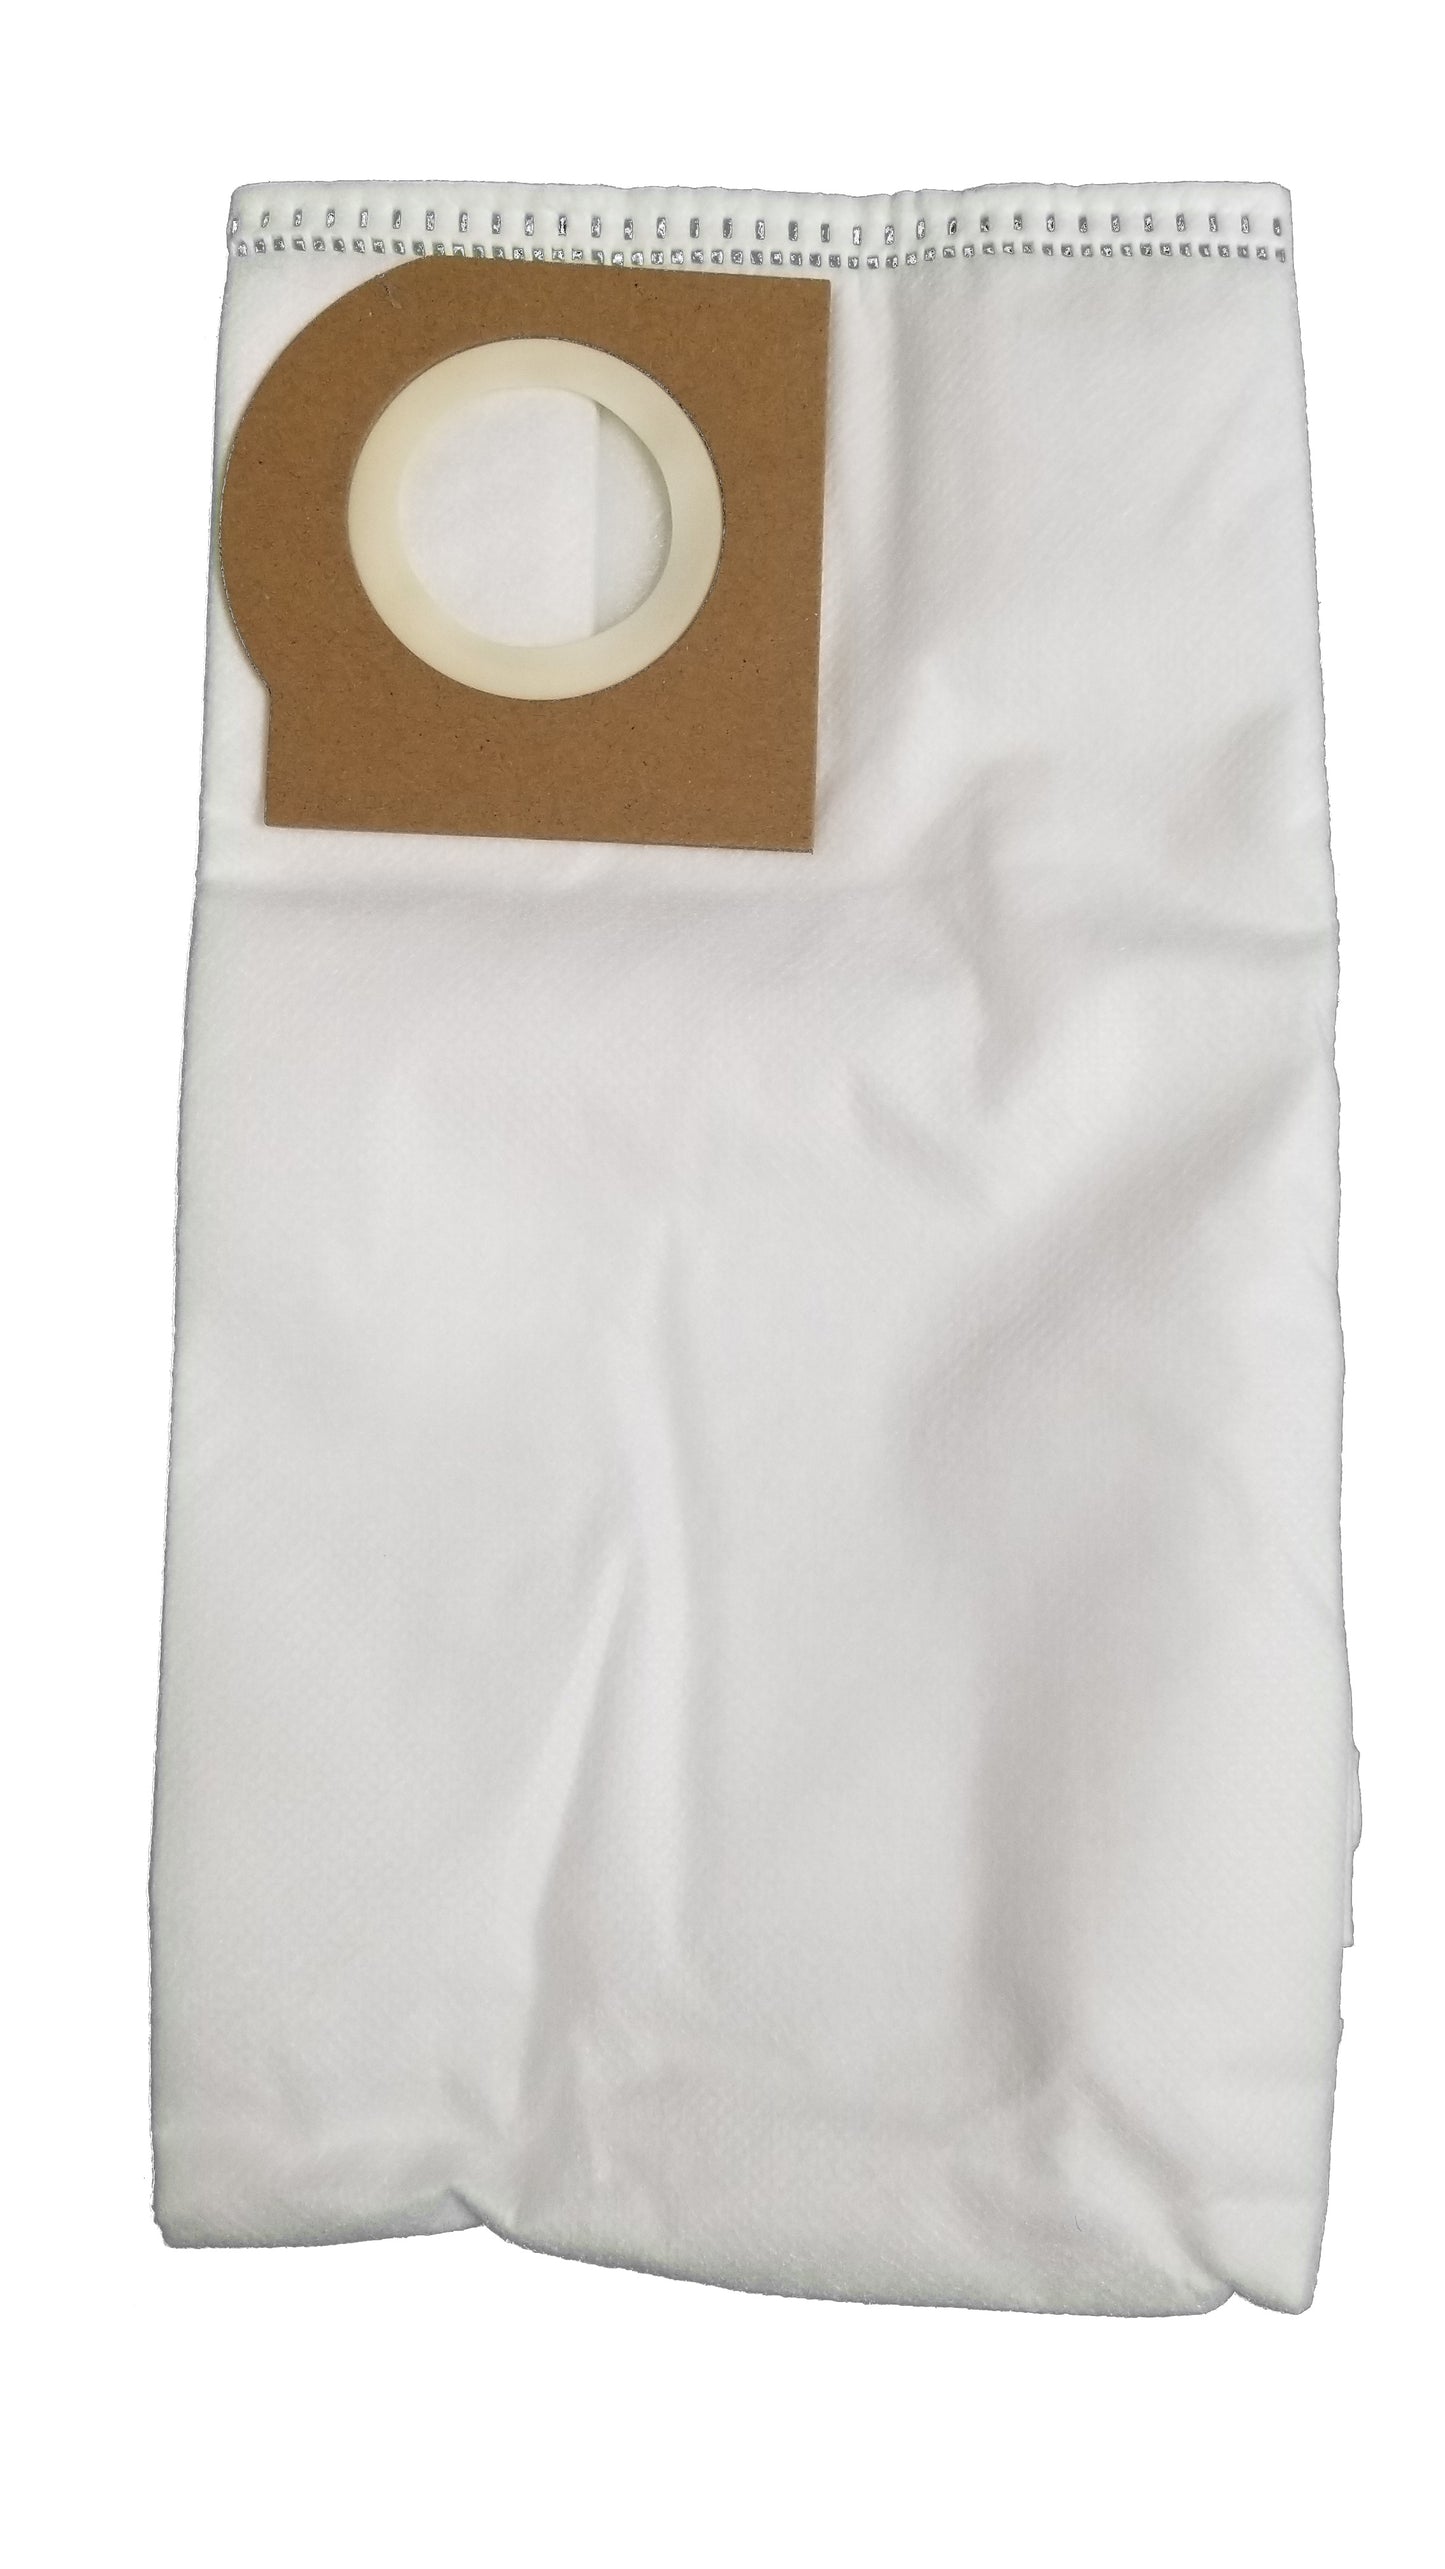 HEPA Filtration Vacuum Dust Bags for Riccar Type W Uprights - 6 Pack